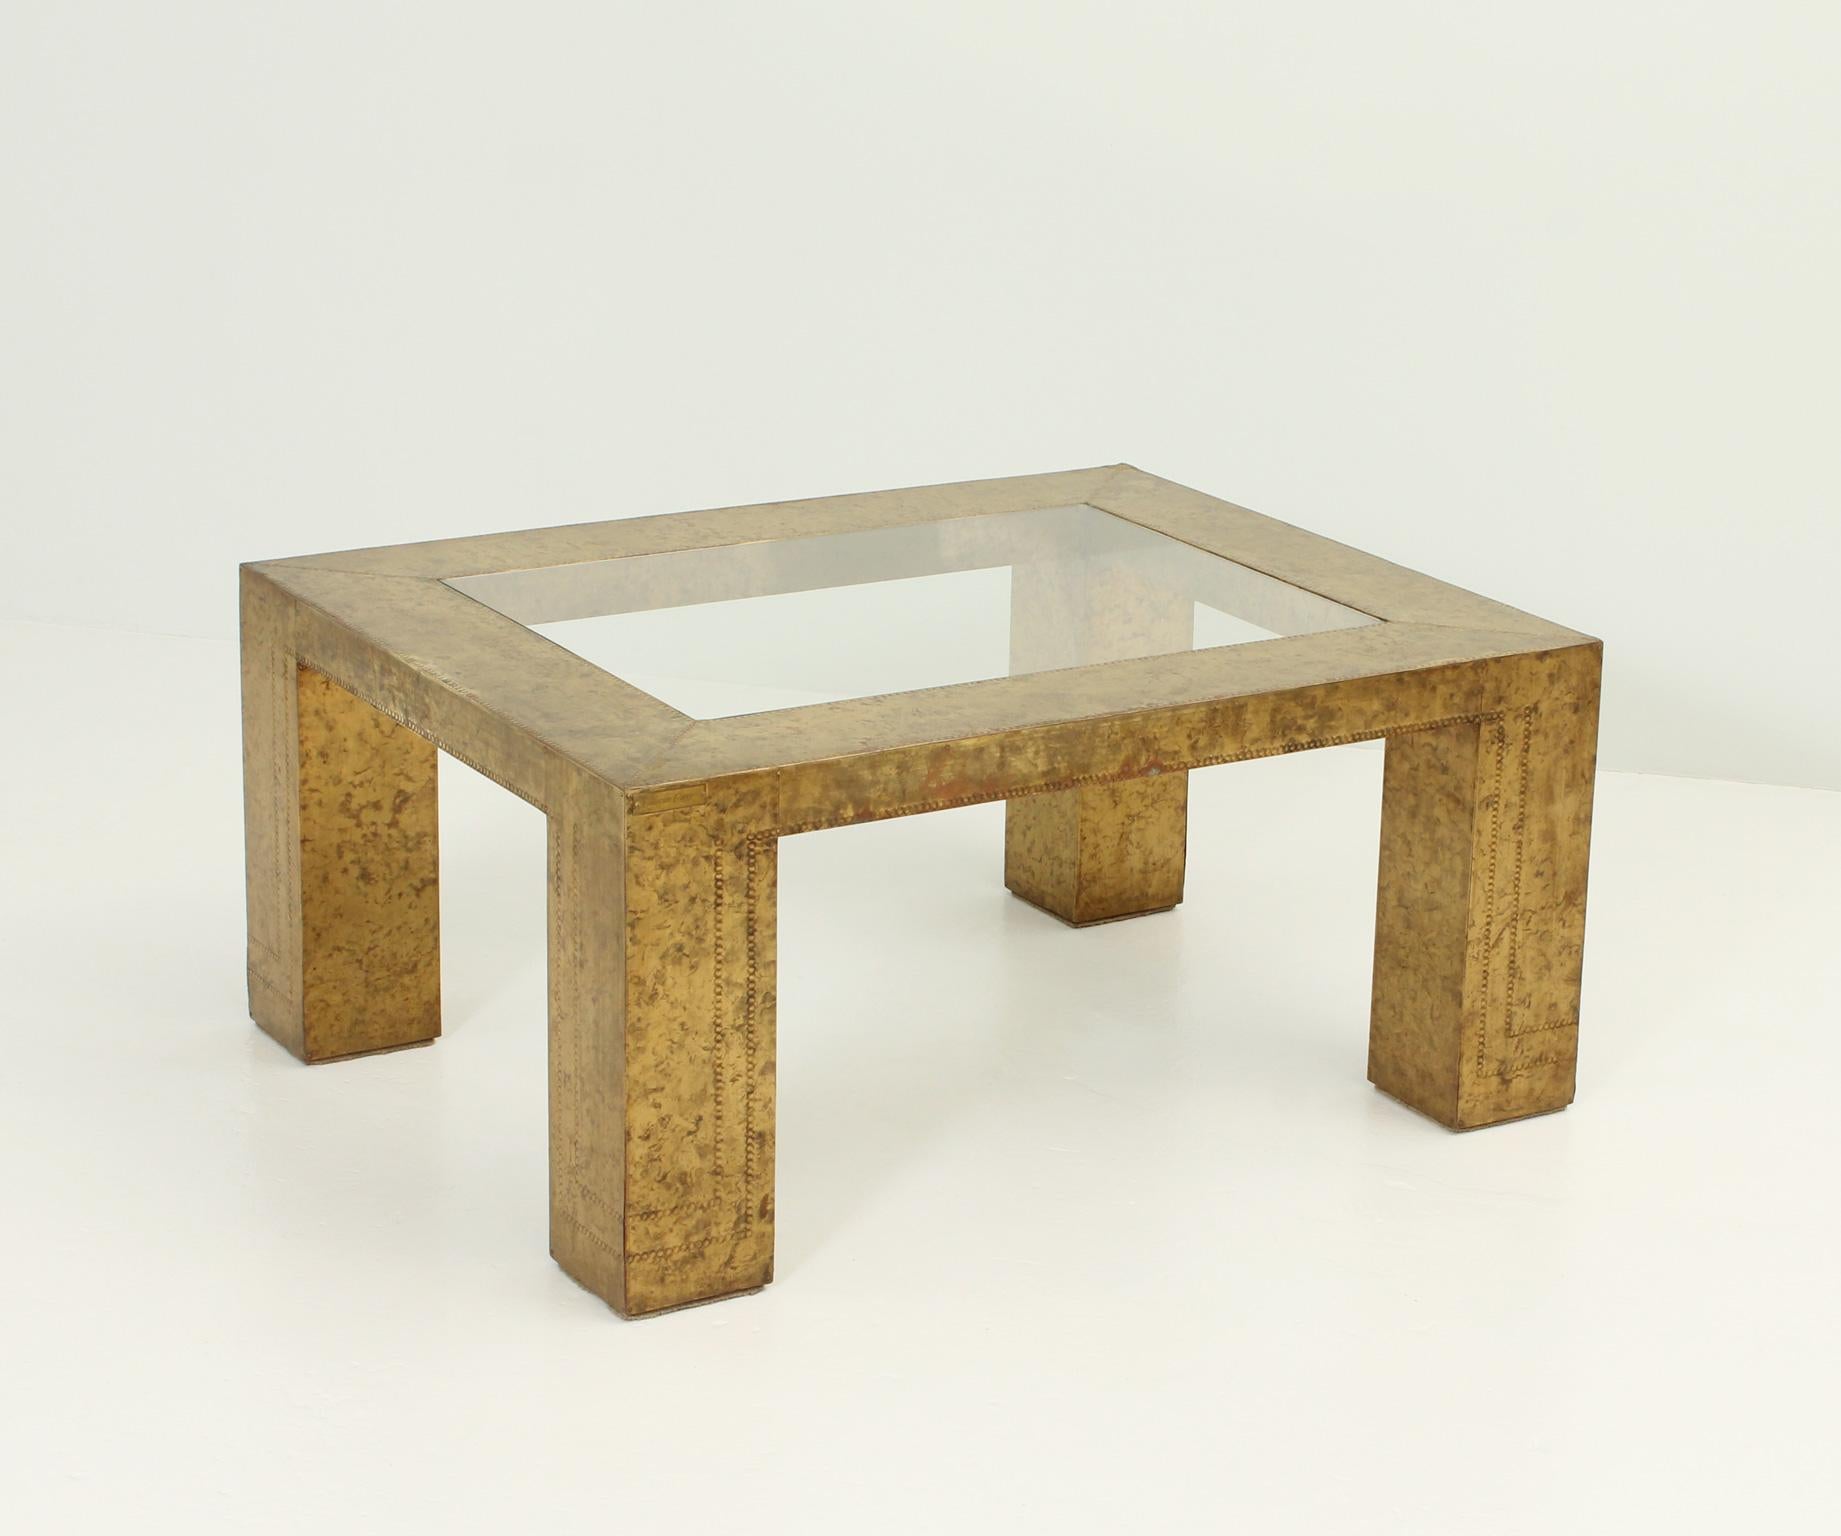 Coffee table from the carey collection edited by argentinian designed Rodolfo Dubarry in the late 1970's, Spain. Acid finished and embossed brass and clear glass top.